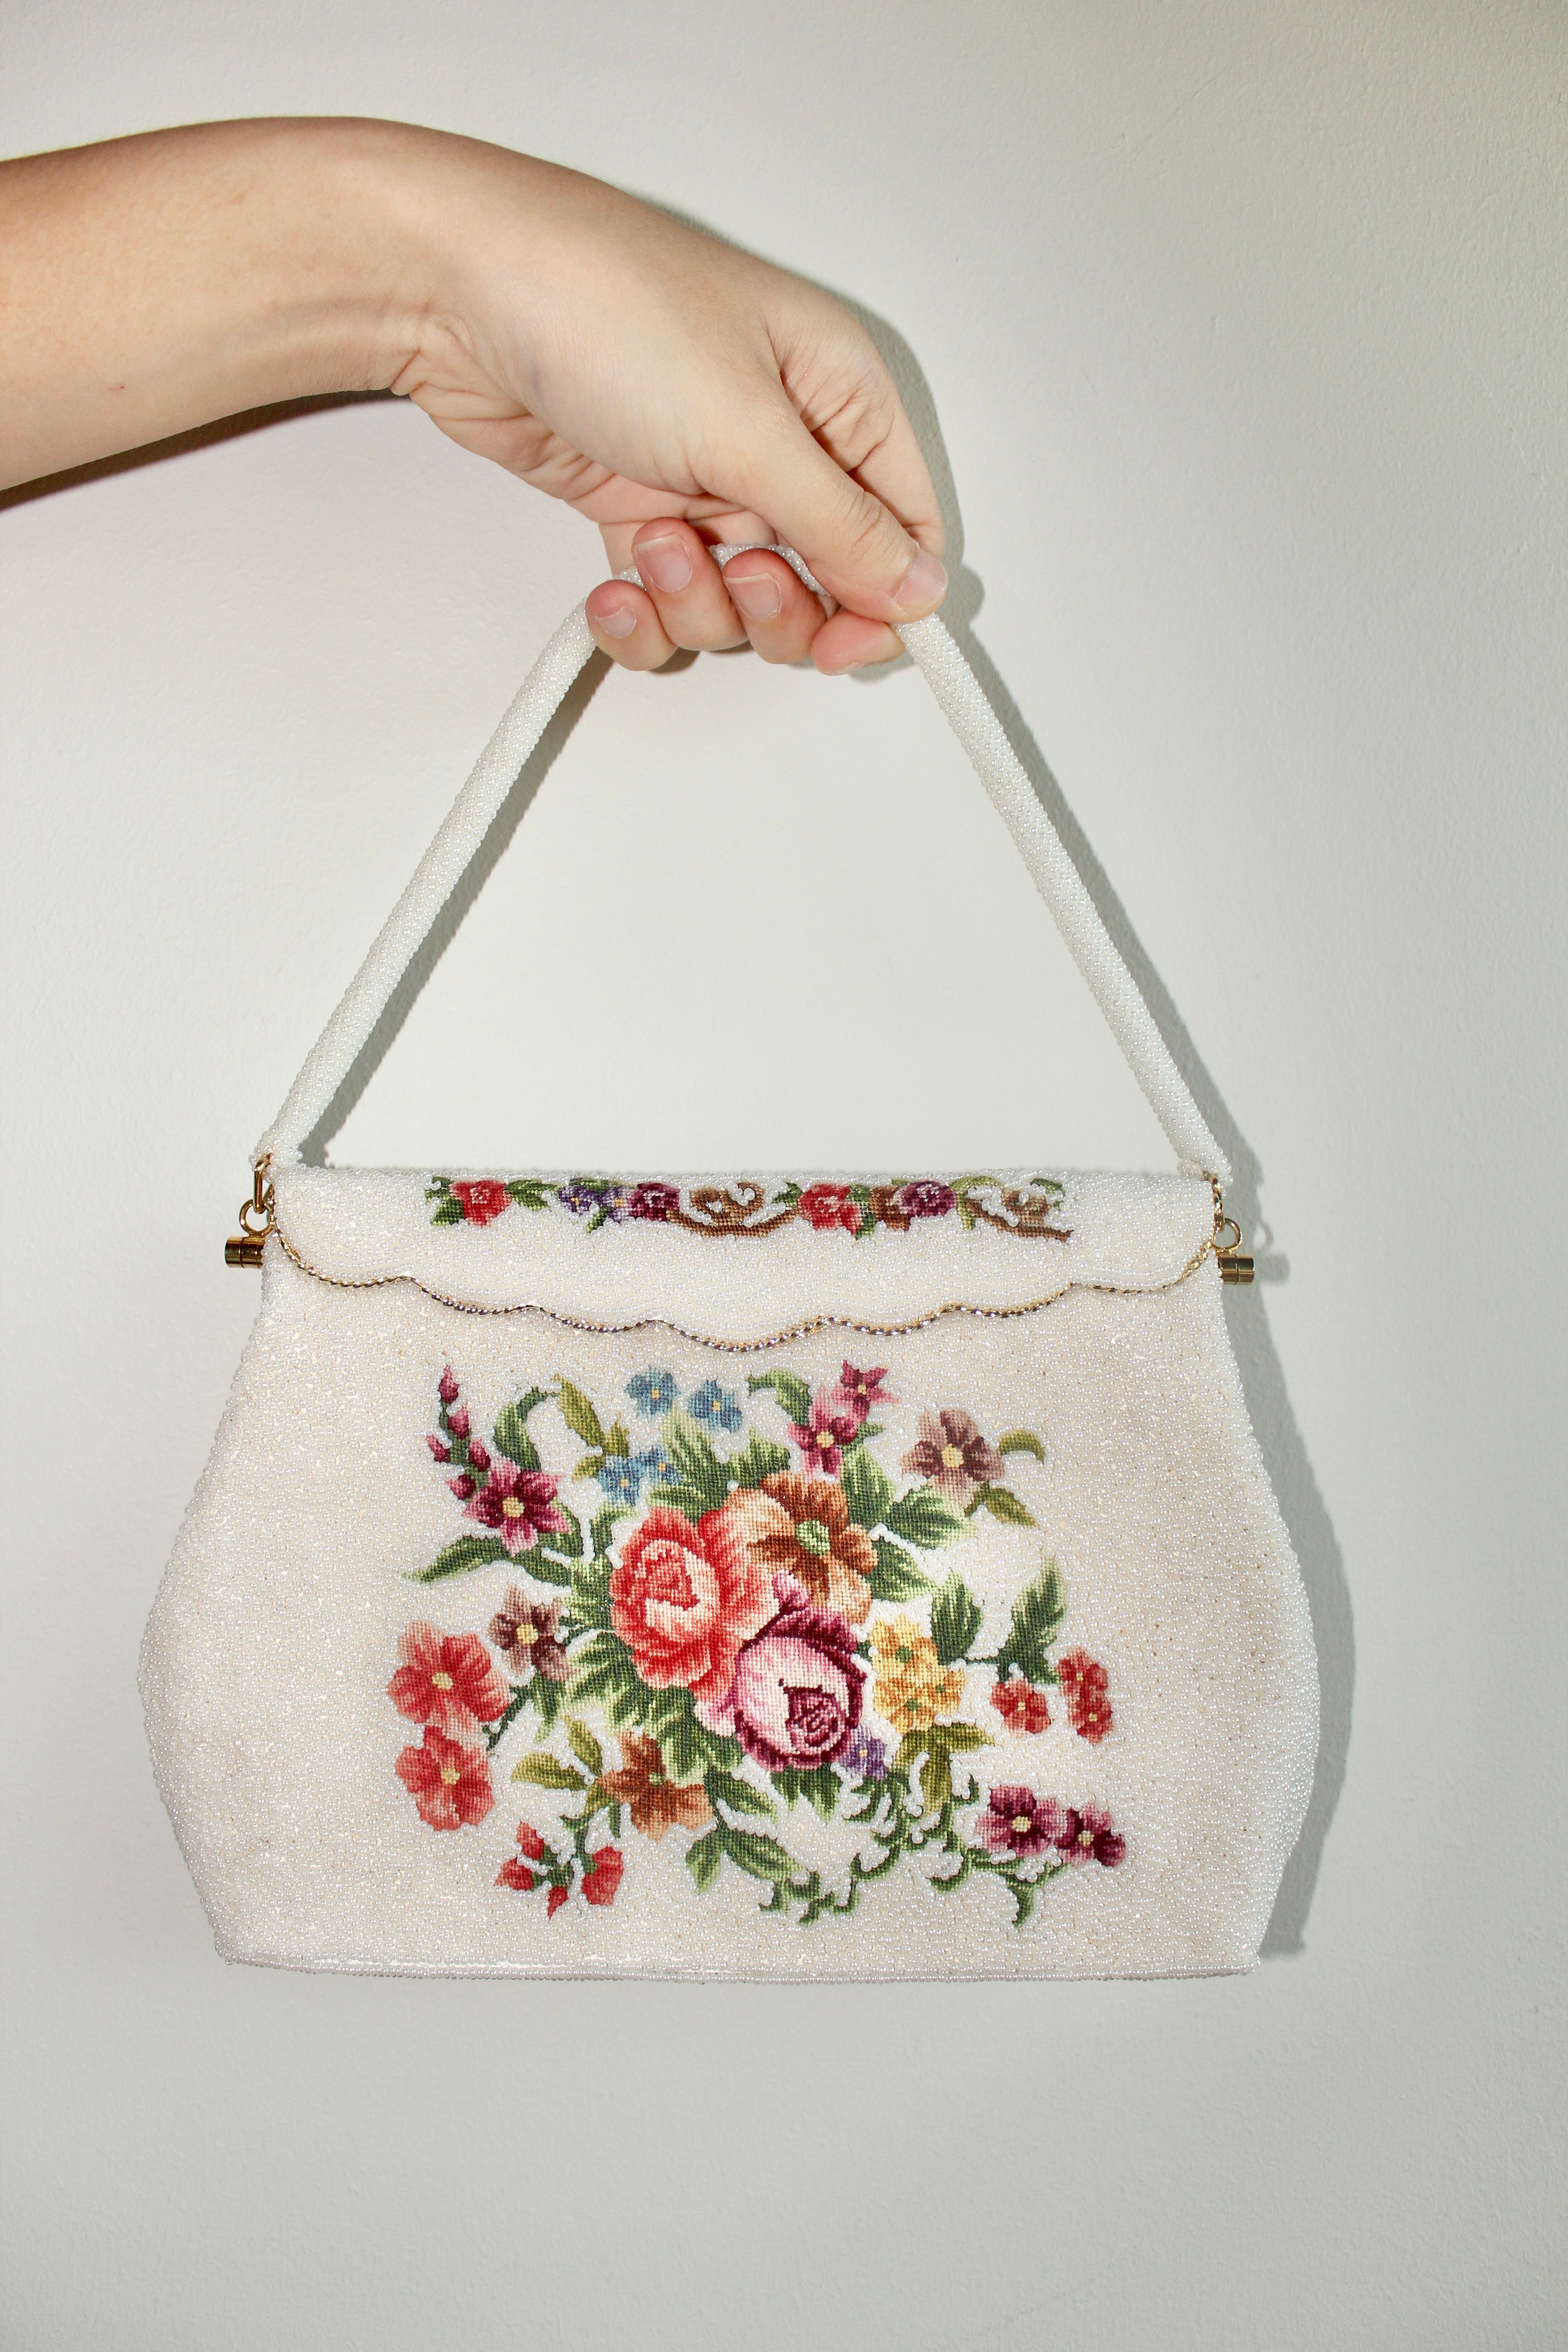 Vintage 80s Dainty Floral Beaded Purse